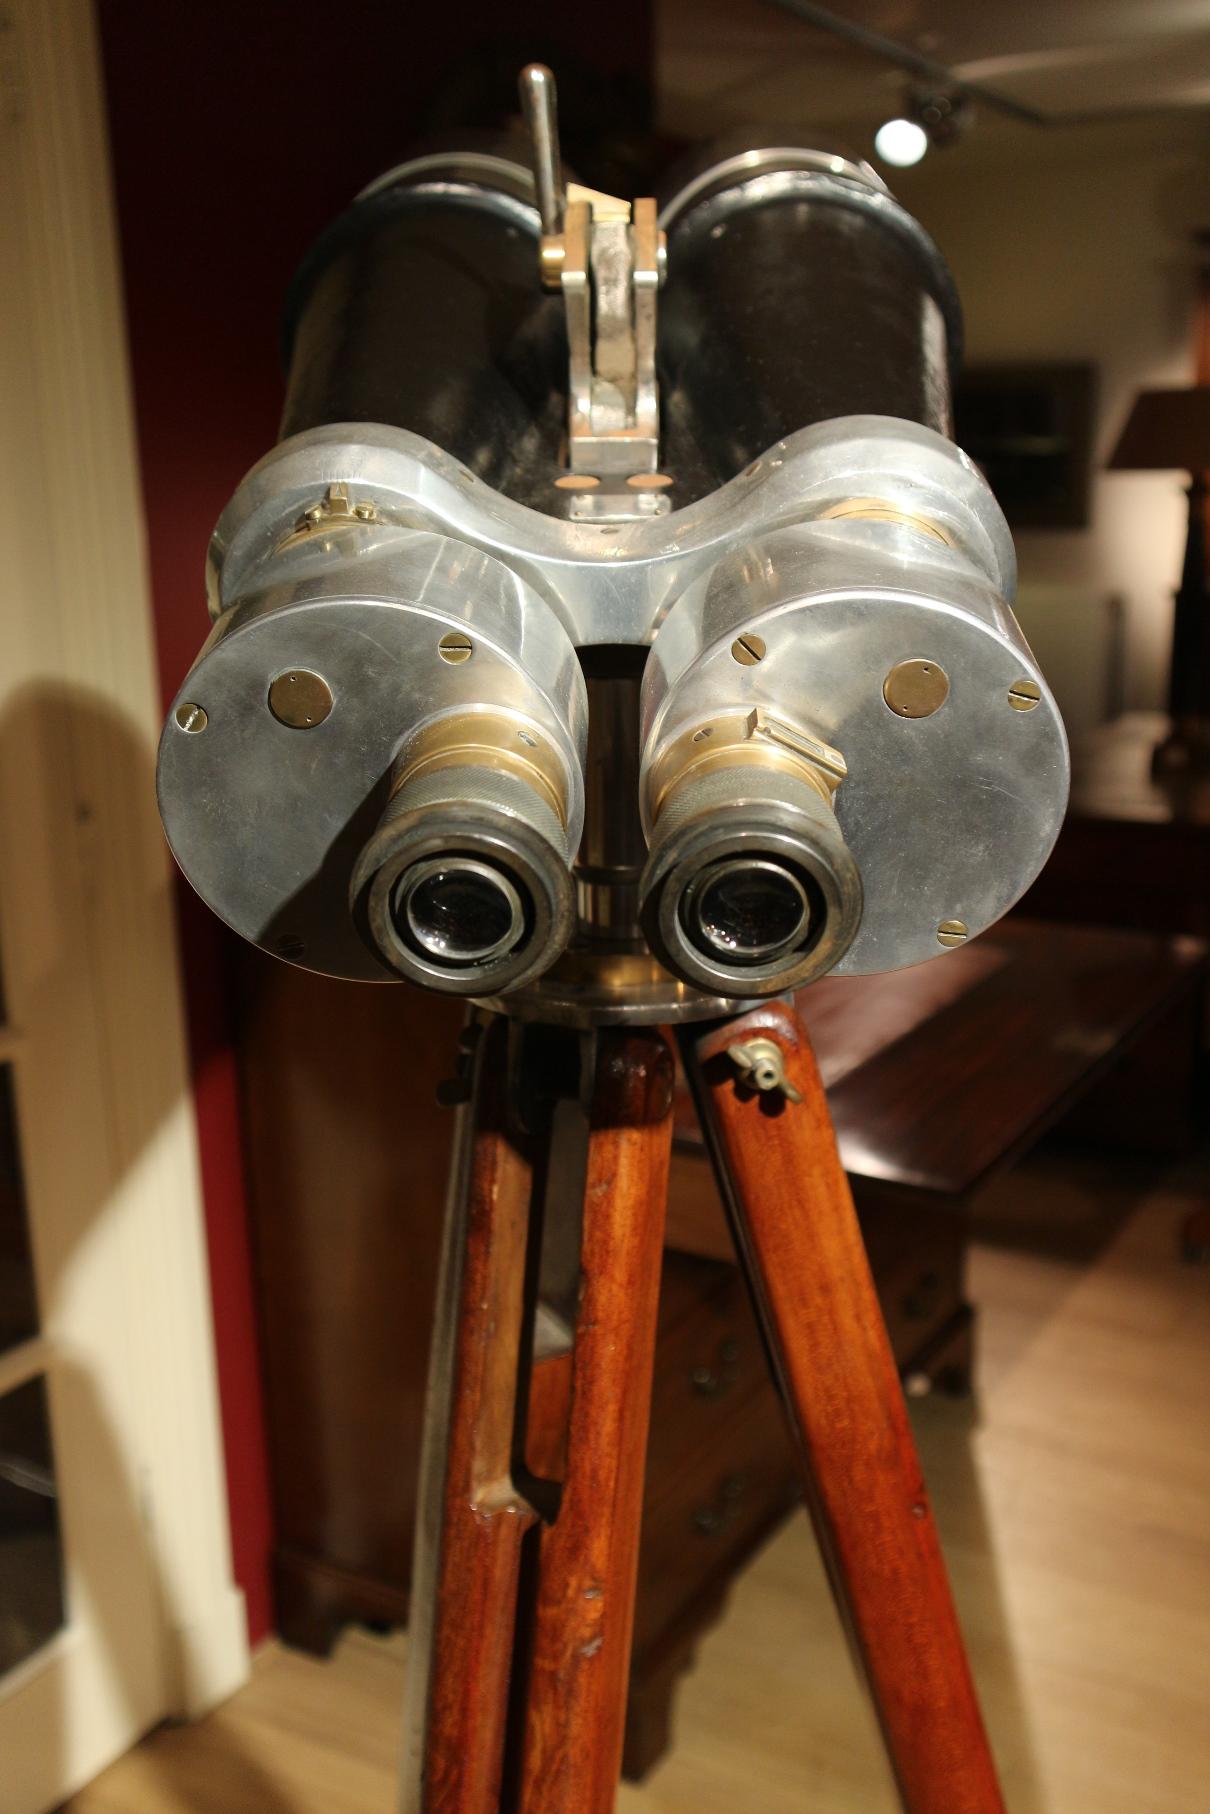 Japanese big eye in good and original condition.
On Japanese warships a sea binocular was placed on towers or 90 feet high, with a primary mission to spot Allied ships and airplanes
The American gigantic binoculars that were used during the Second